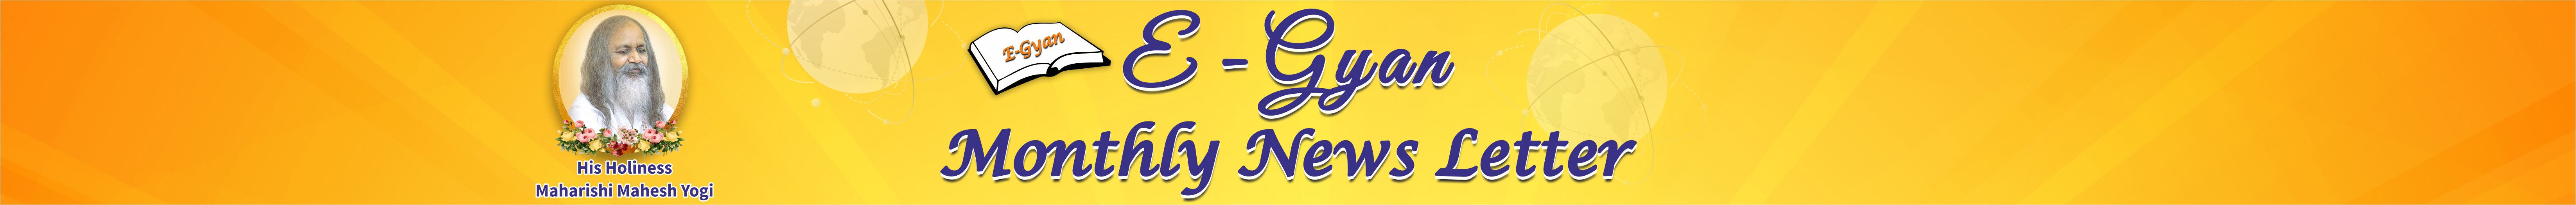 e-gyan-monthly-news-letter